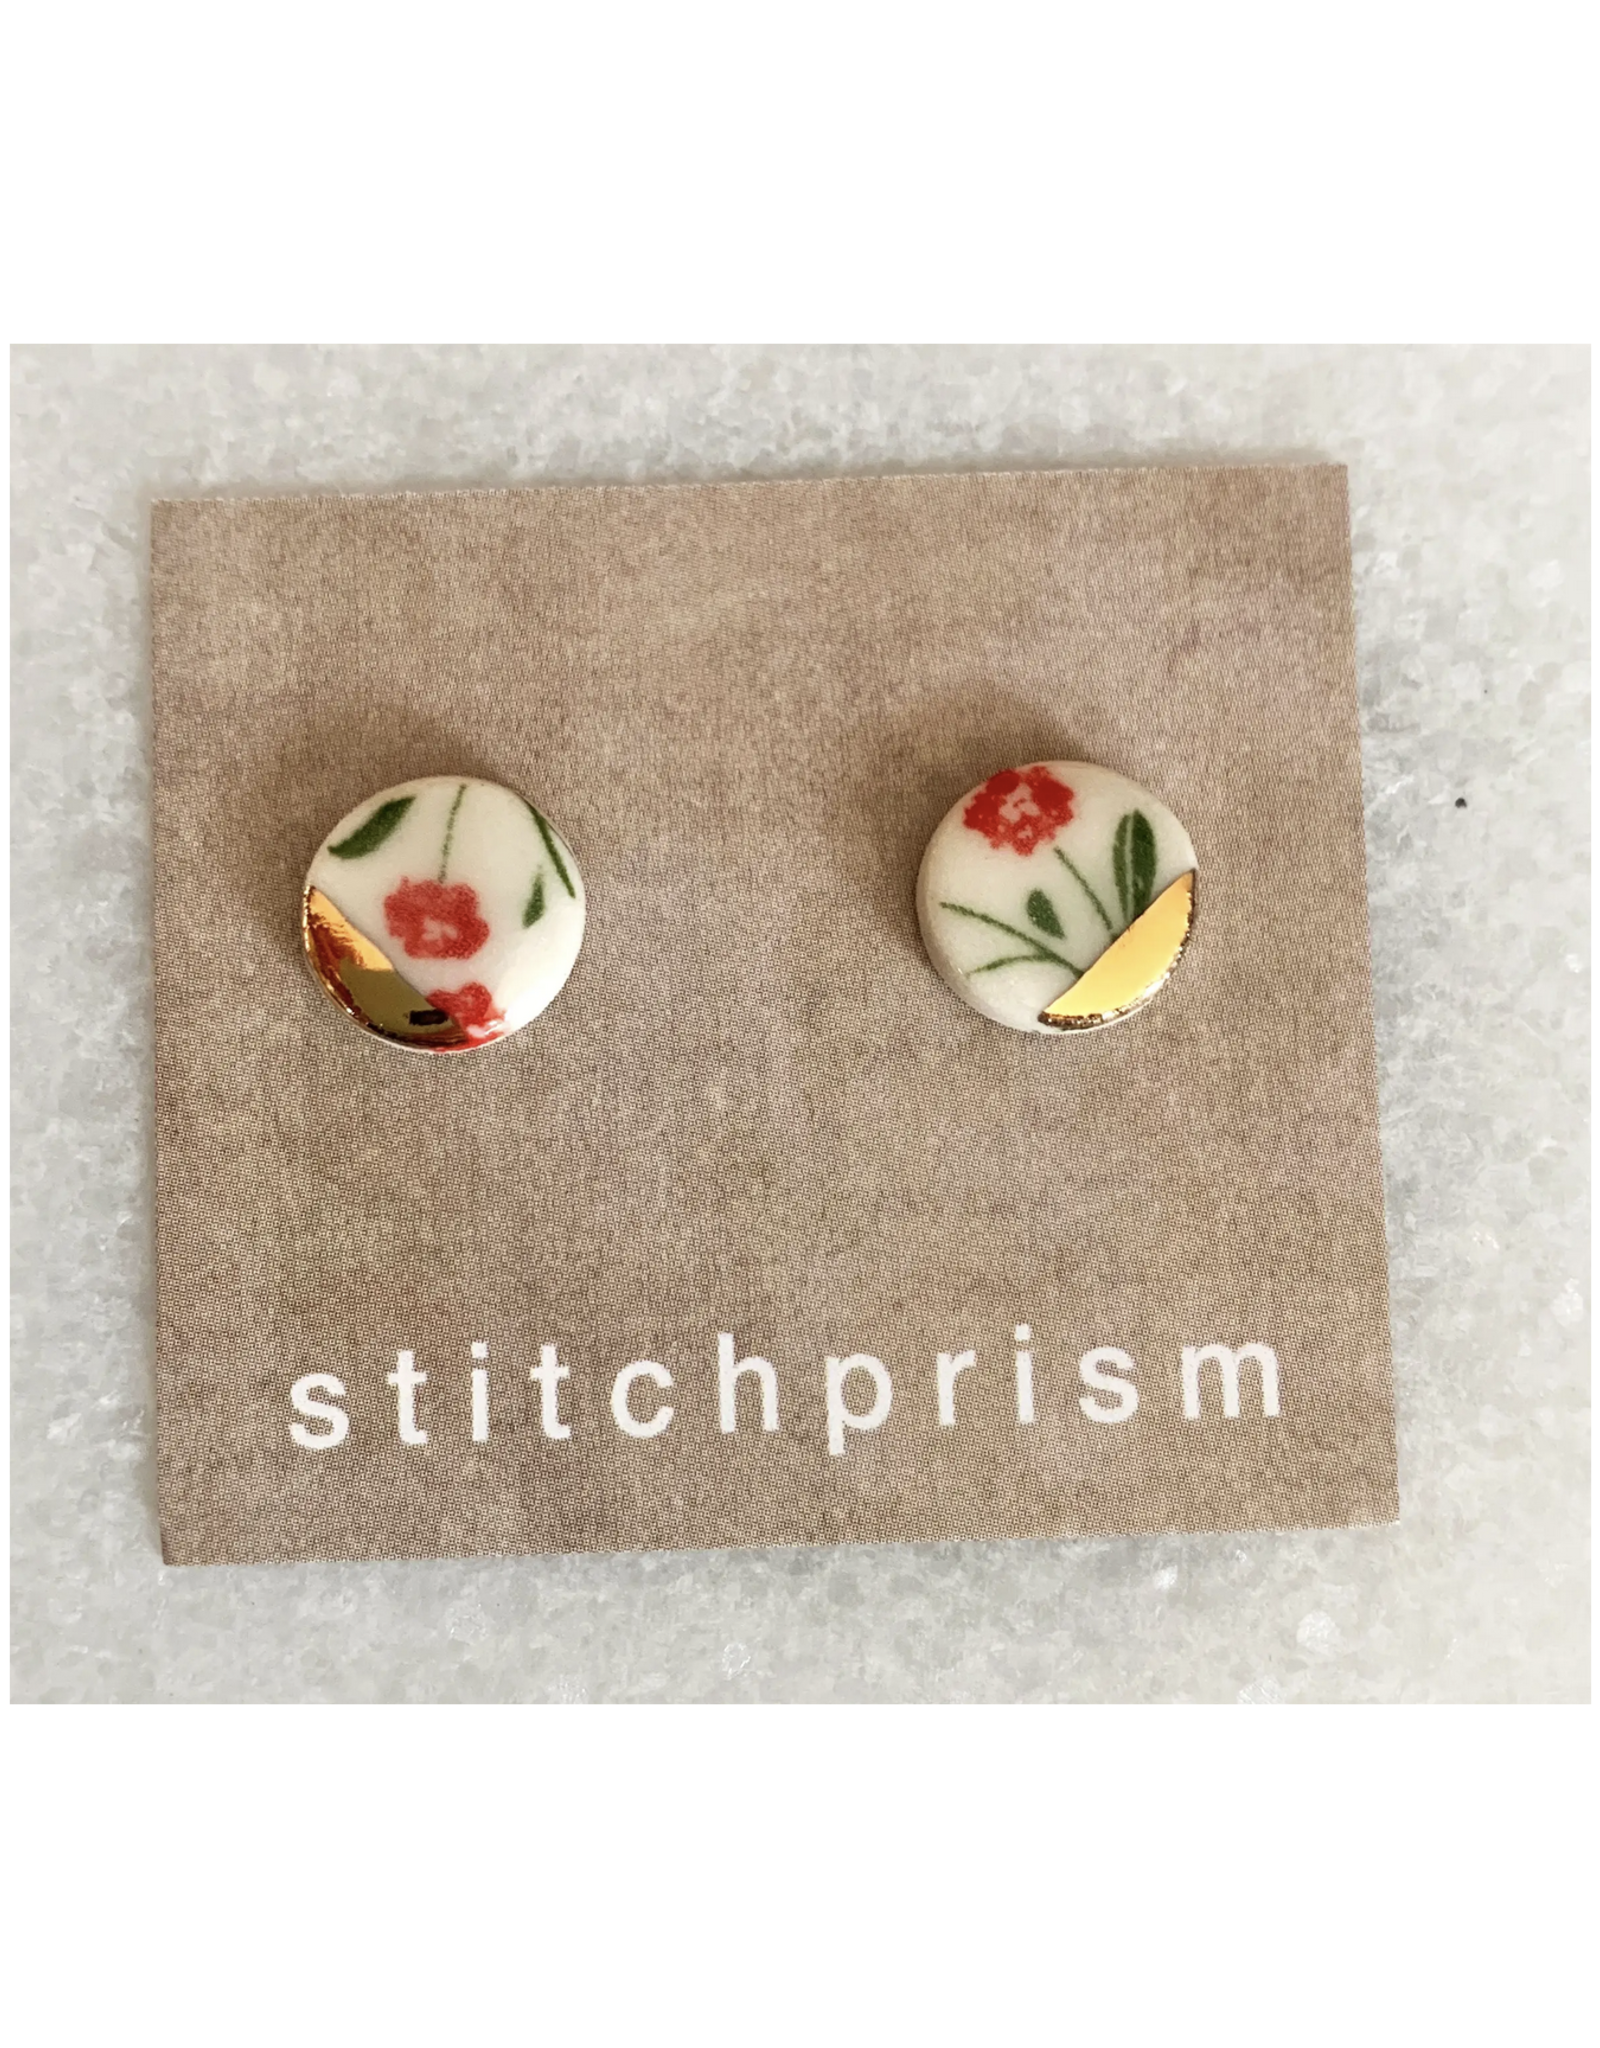 Small Circle Floral Stud Earrings